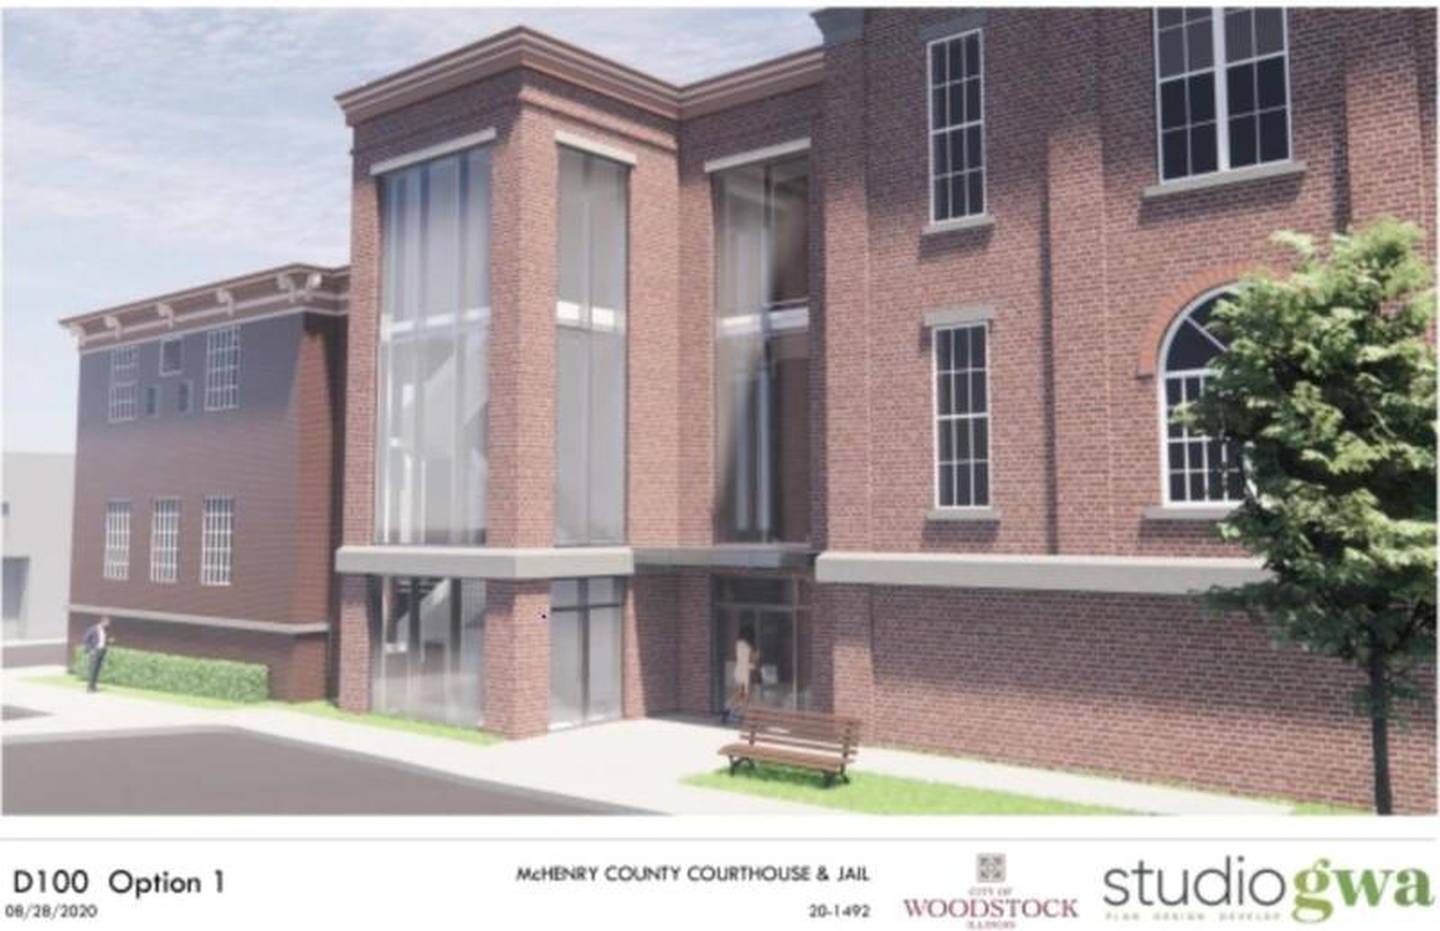 A rendering of the proposed connector building design for the Old Courthouse and Sheriff's Jail approved by the Woodstock City Council Tuesday.